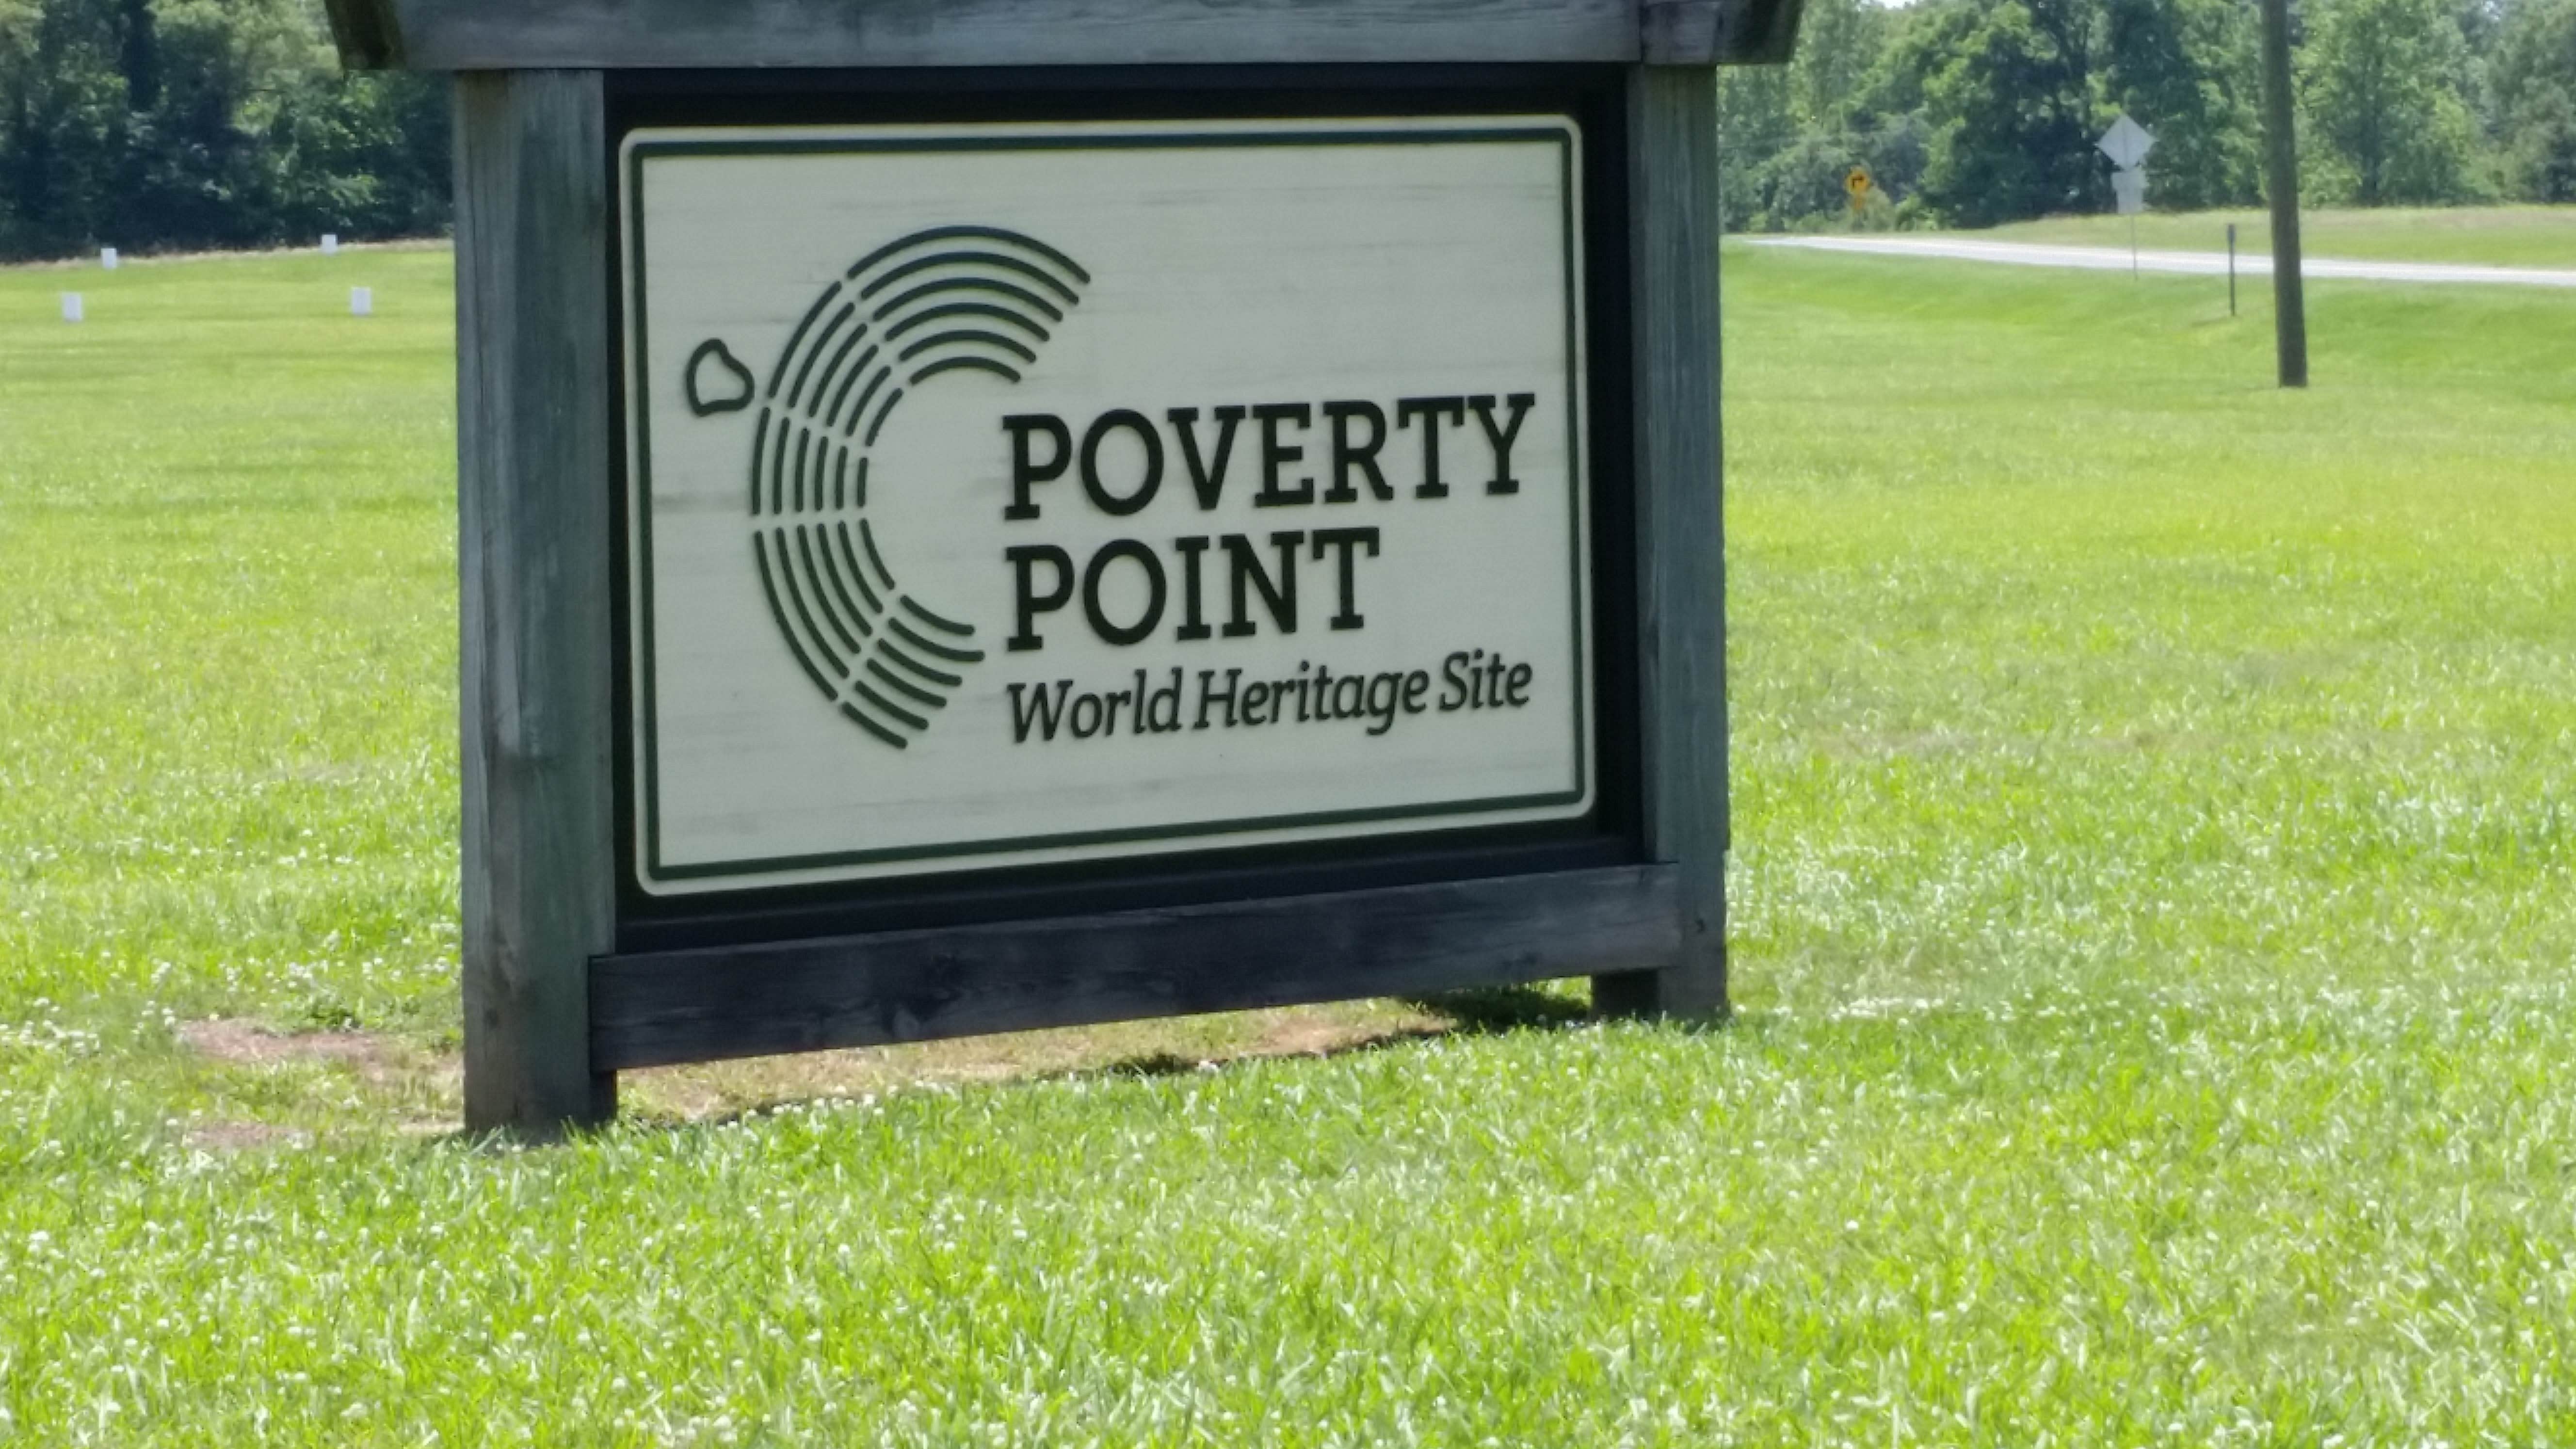 nearby Poverty Point World Heritage Site